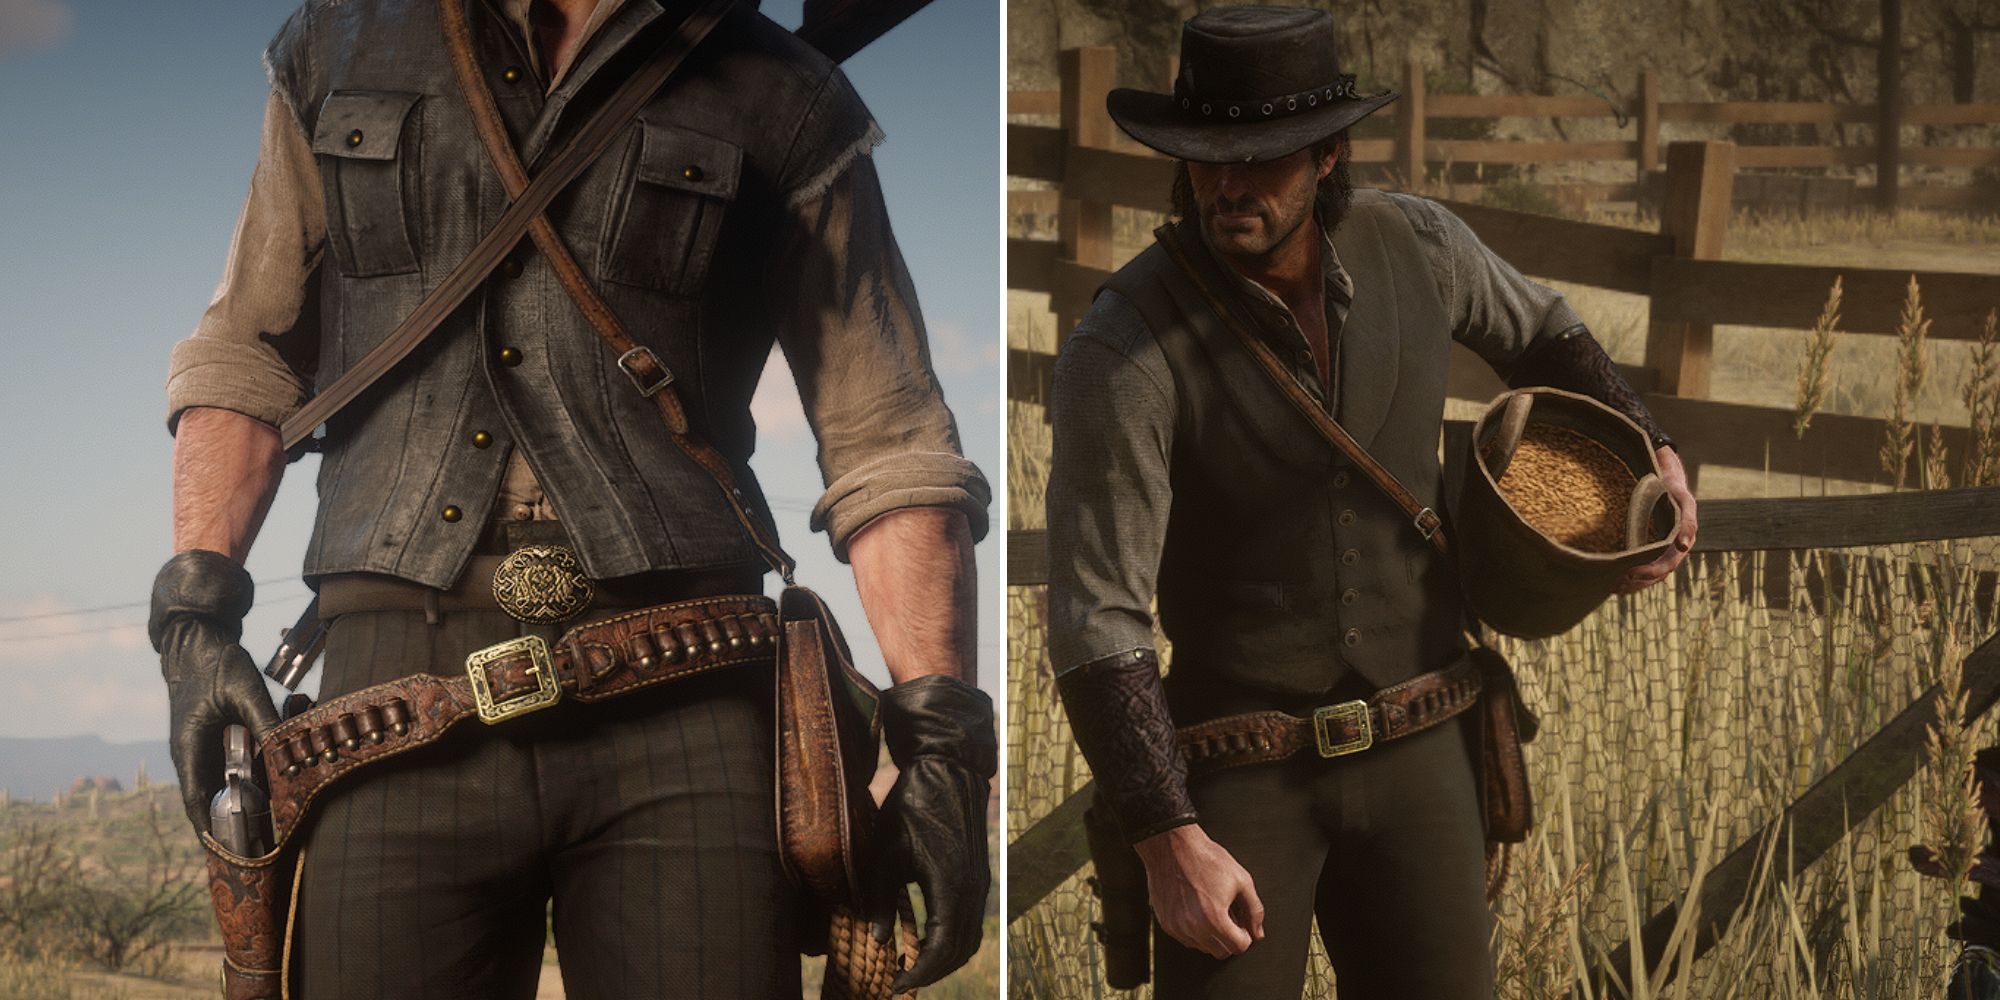 A split image from Red Dead Redemption 2, which features reshaded outfits for Arthur Morgan and John Marston